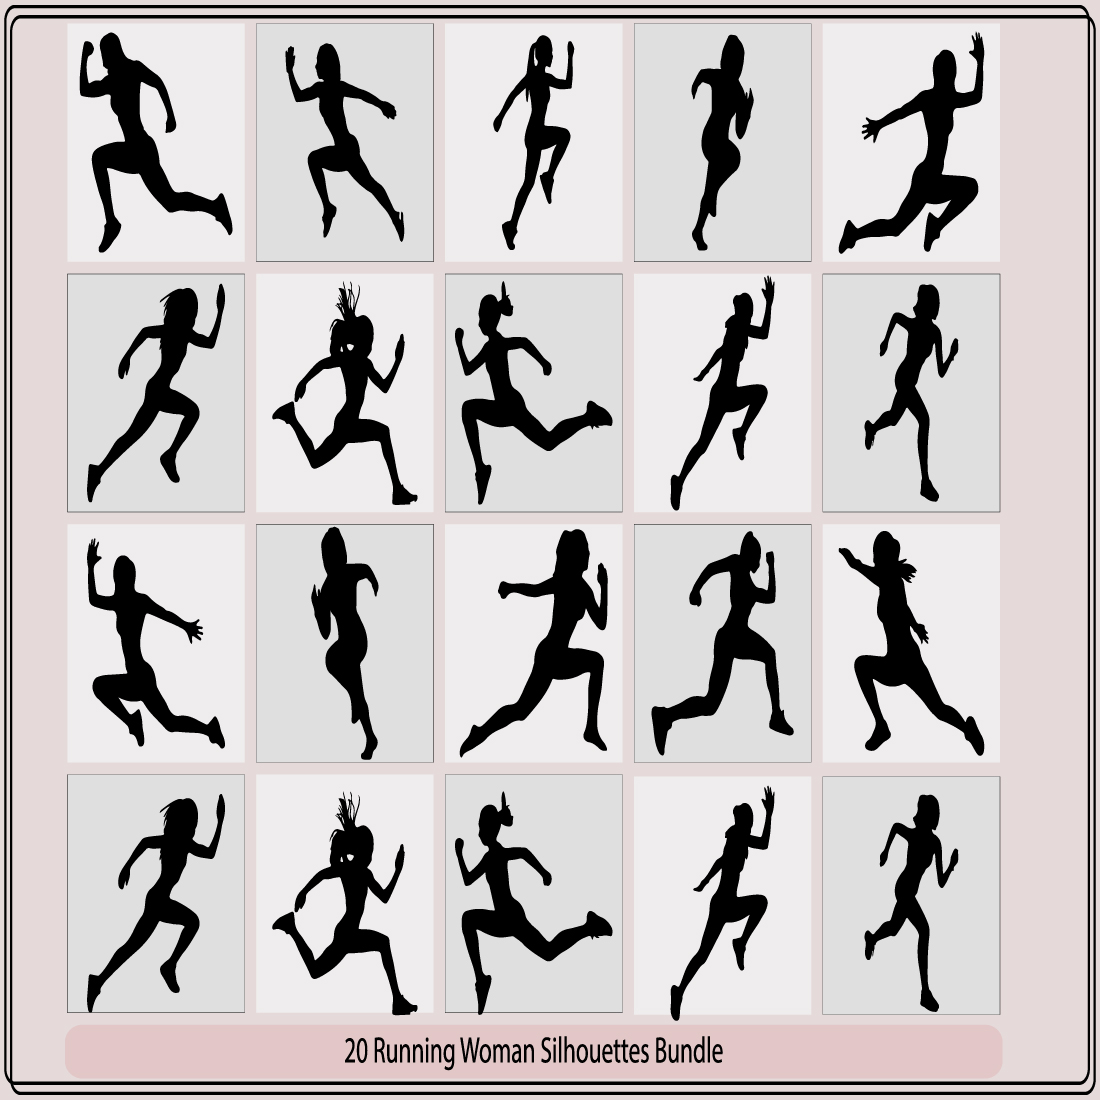 Running woman side view vector silhouette,Young running woman,Running woman silhouette,Running woman or female fitness,Set running silhouettes cover image.